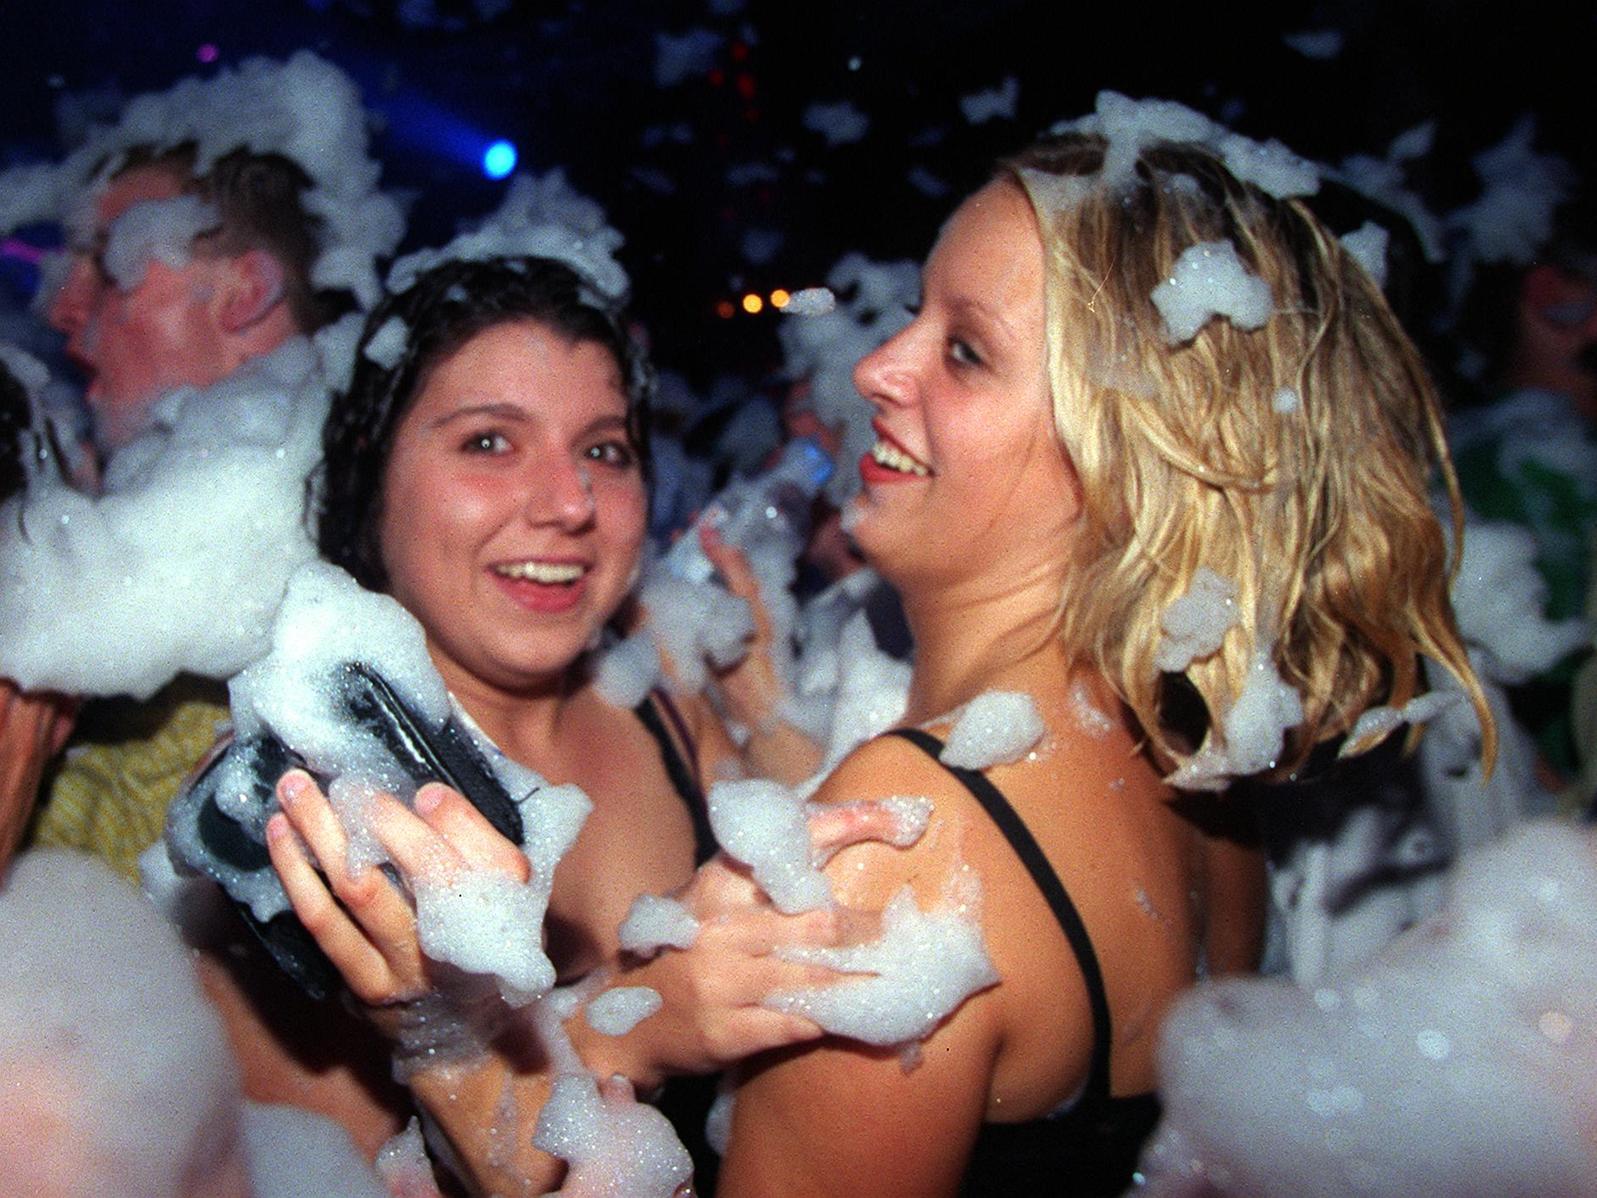 Smile for the camera! Revellers enjoy the foam party.